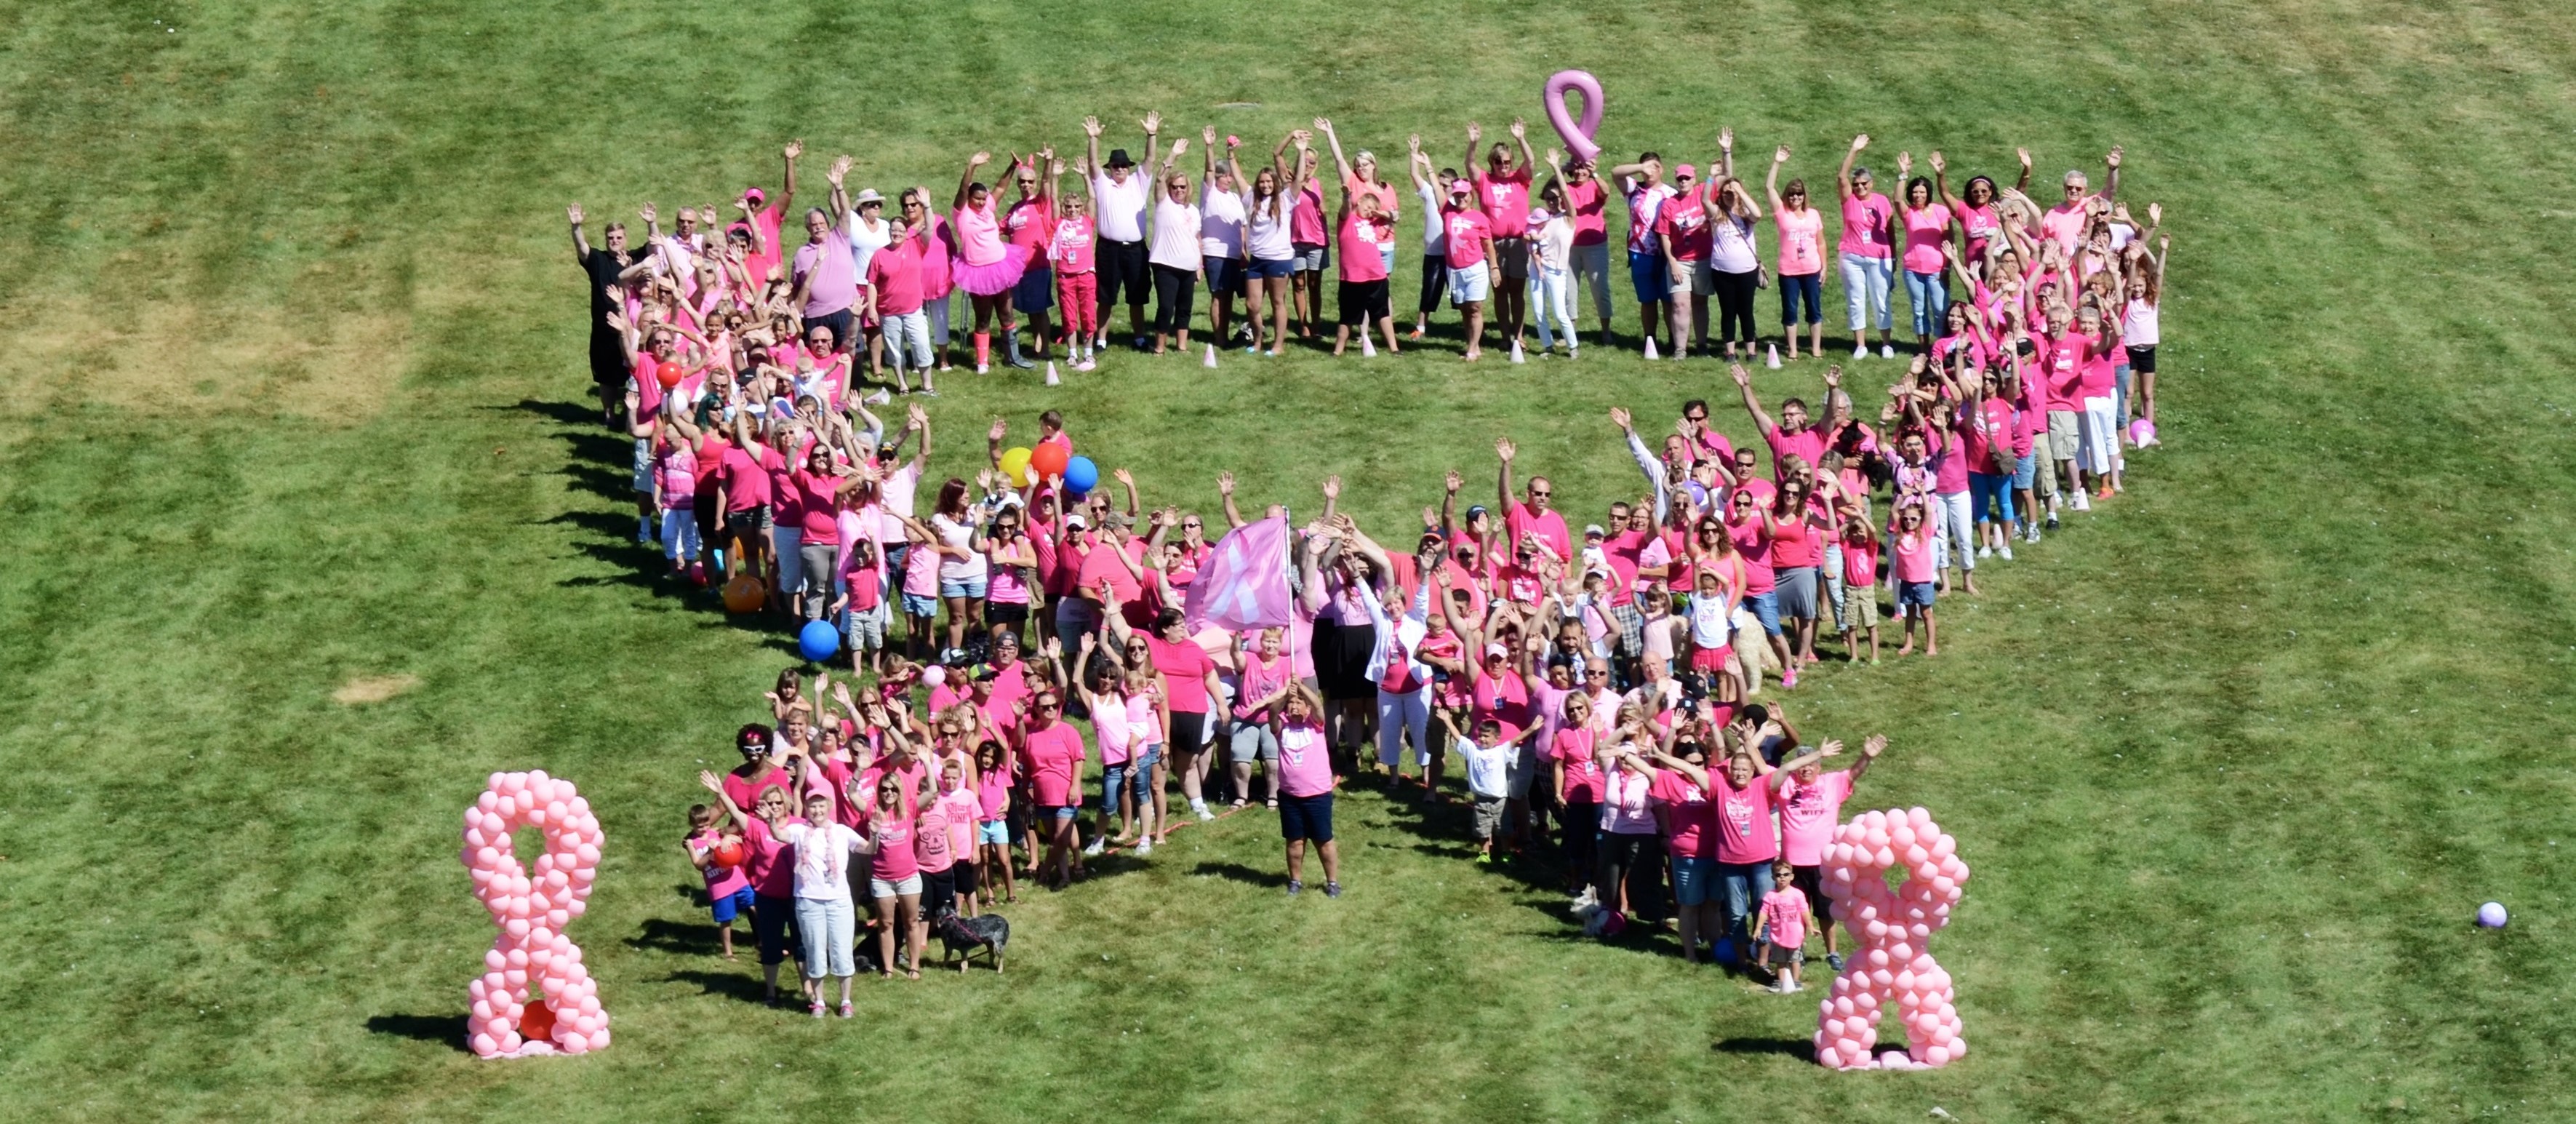 These activists formed a human cancer ribbon.